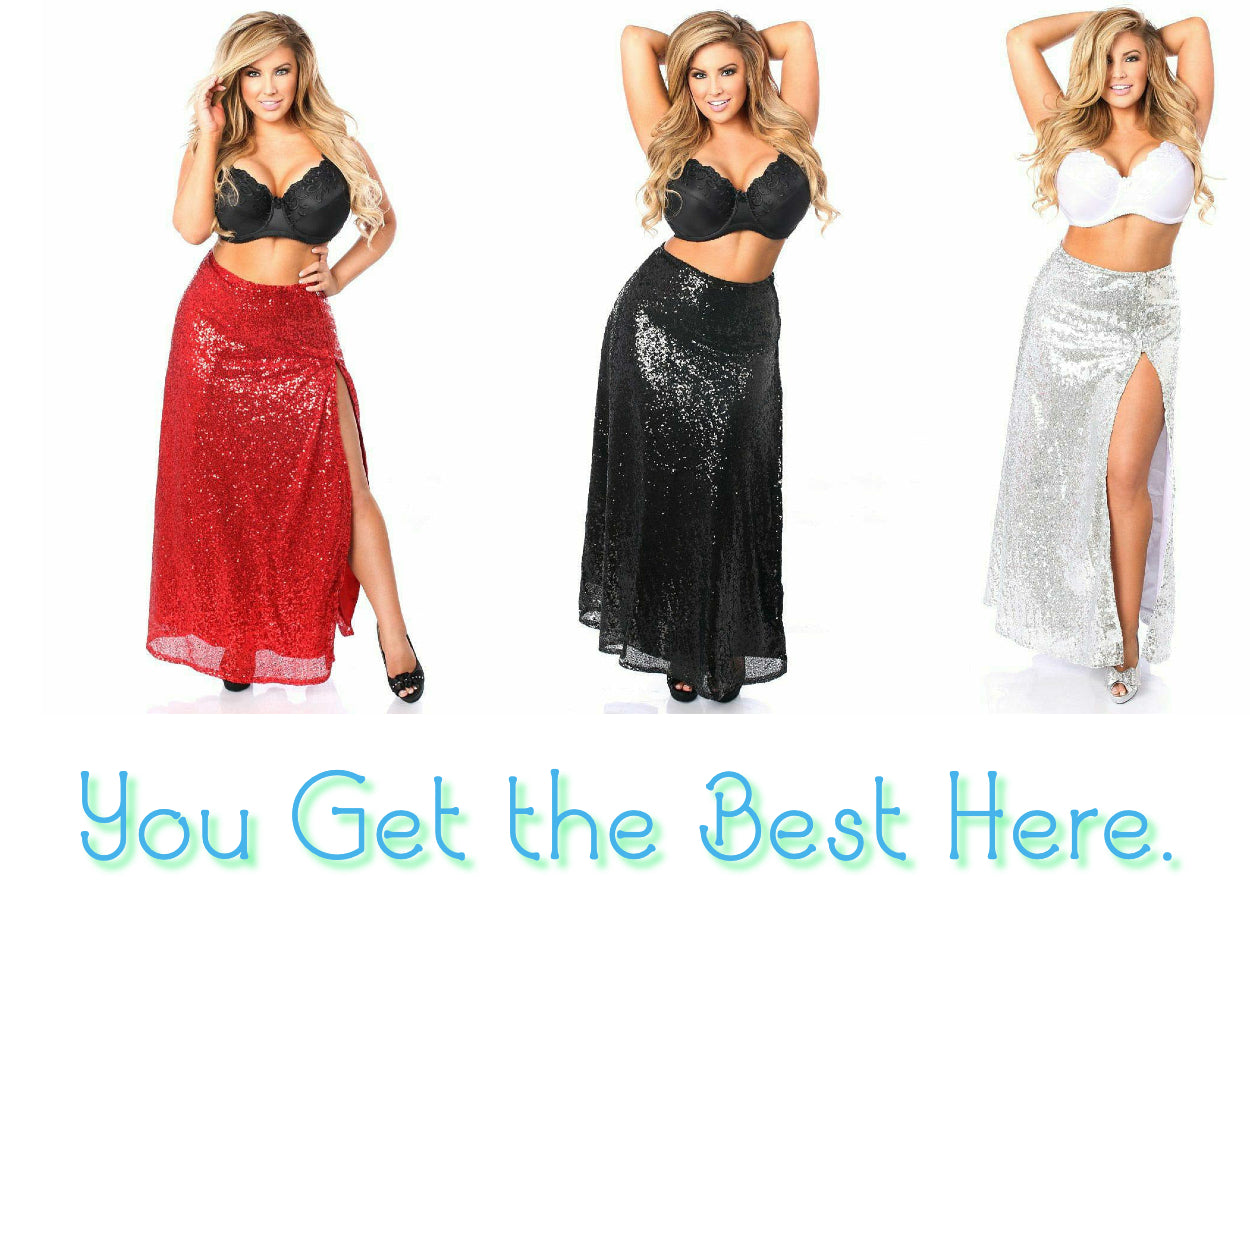 Top Drawer Long Sequin Skirt by Daisy Corsets in 3 Color Choices in Size S, M, L, XL, 2X, 3X, 4X, 5X, or 6X